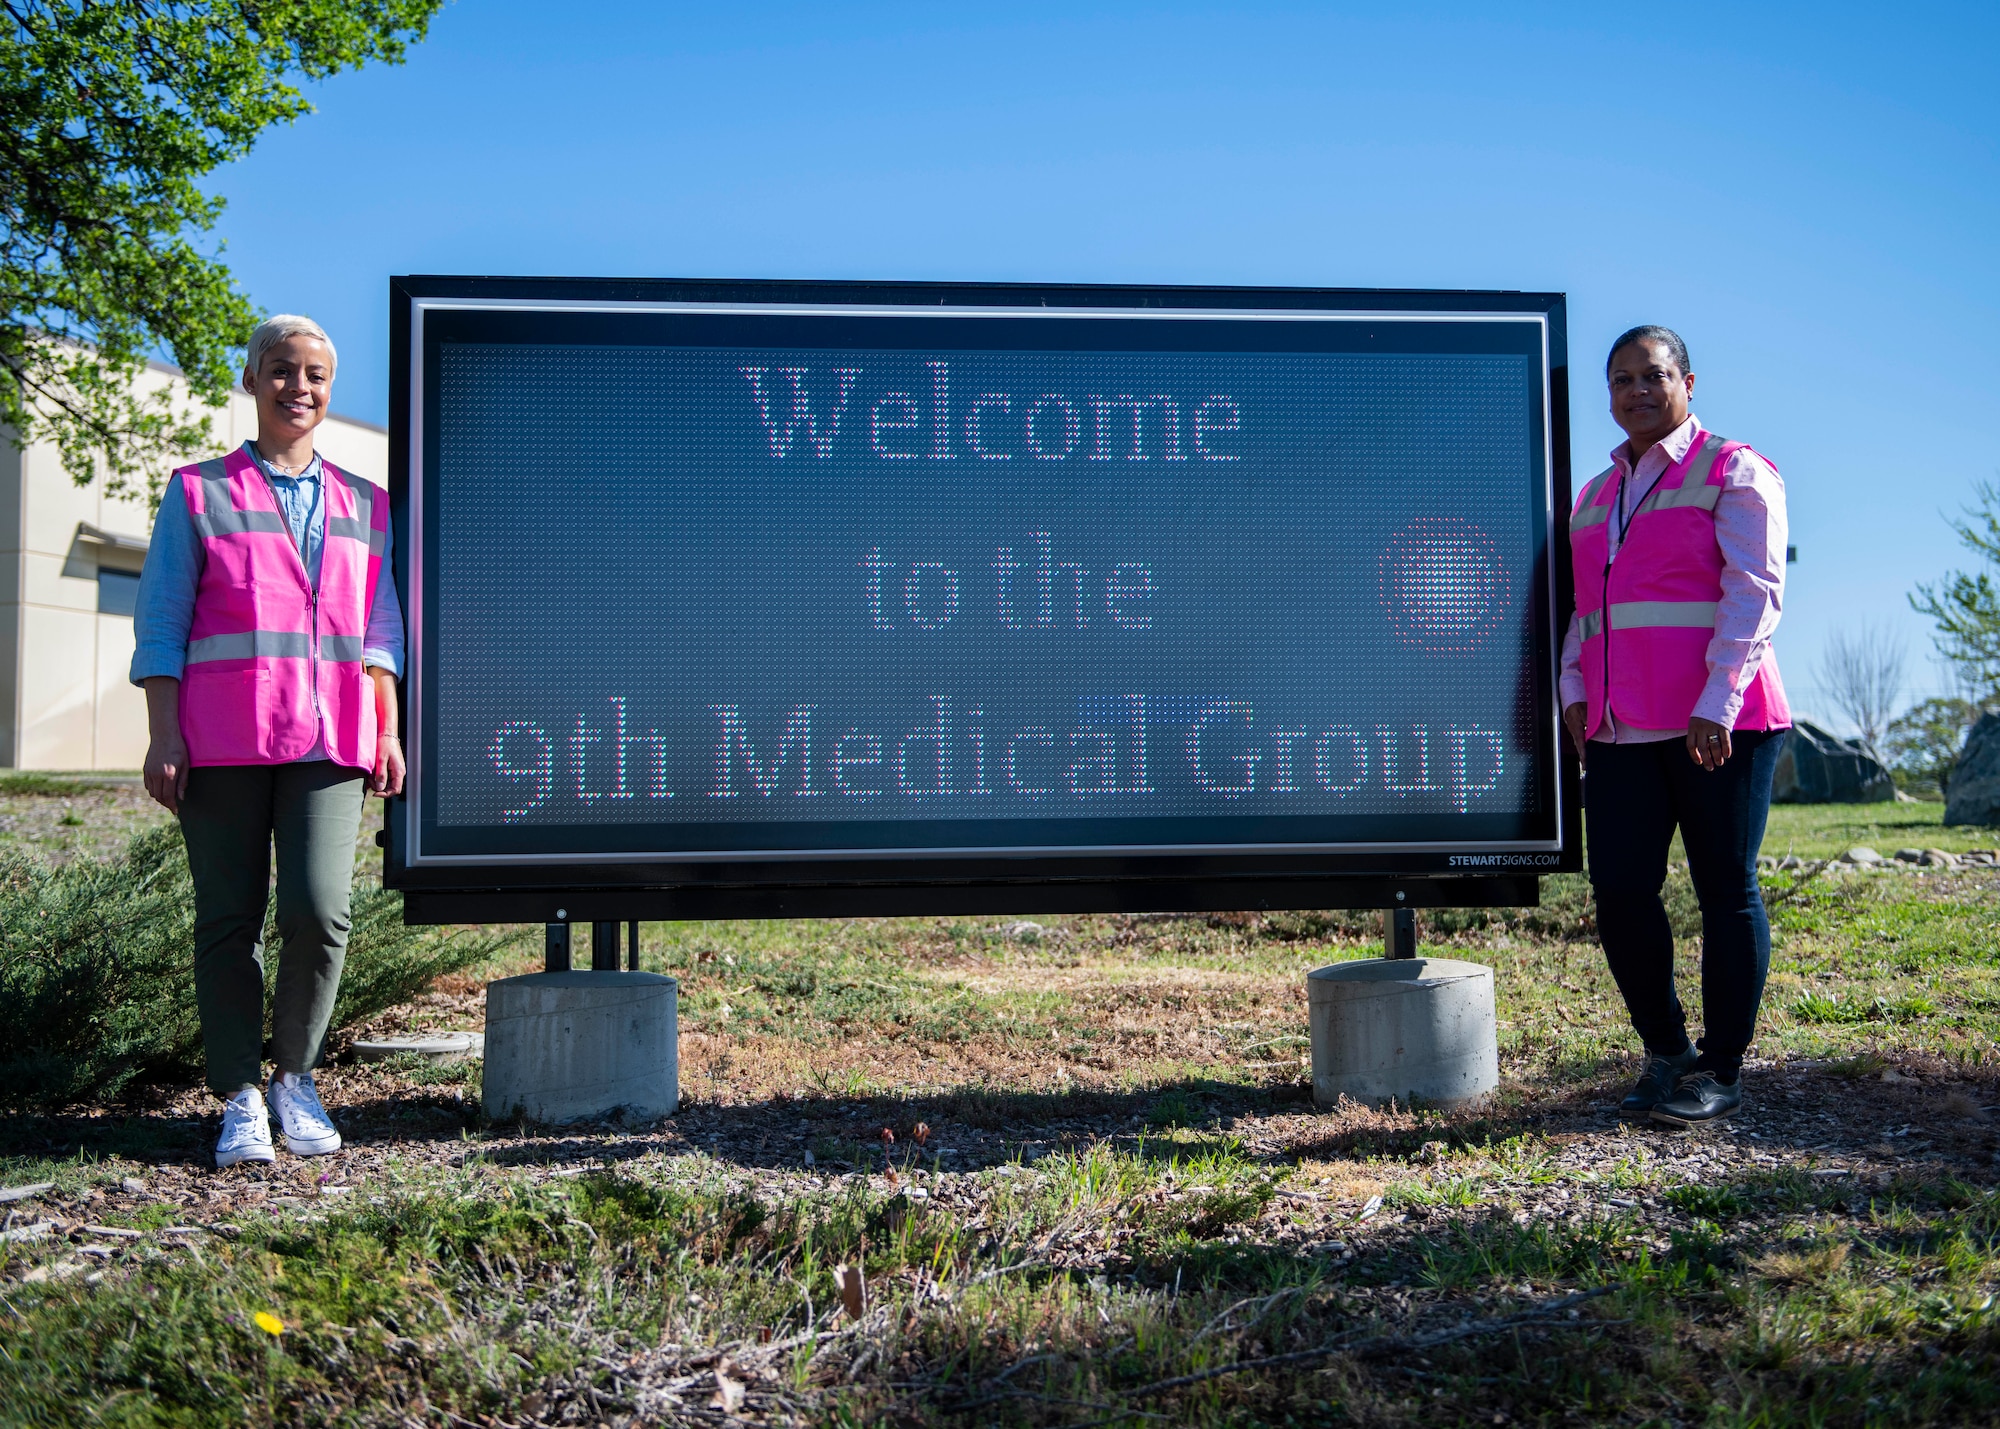 Lynn Bergmann, 9th Medical Group patient safety program coordinator, and Denise Ross, 9th MDG Patient Advocate, pose for a photo in front of the clinic’s marquee on Beale Air Force Base, California.